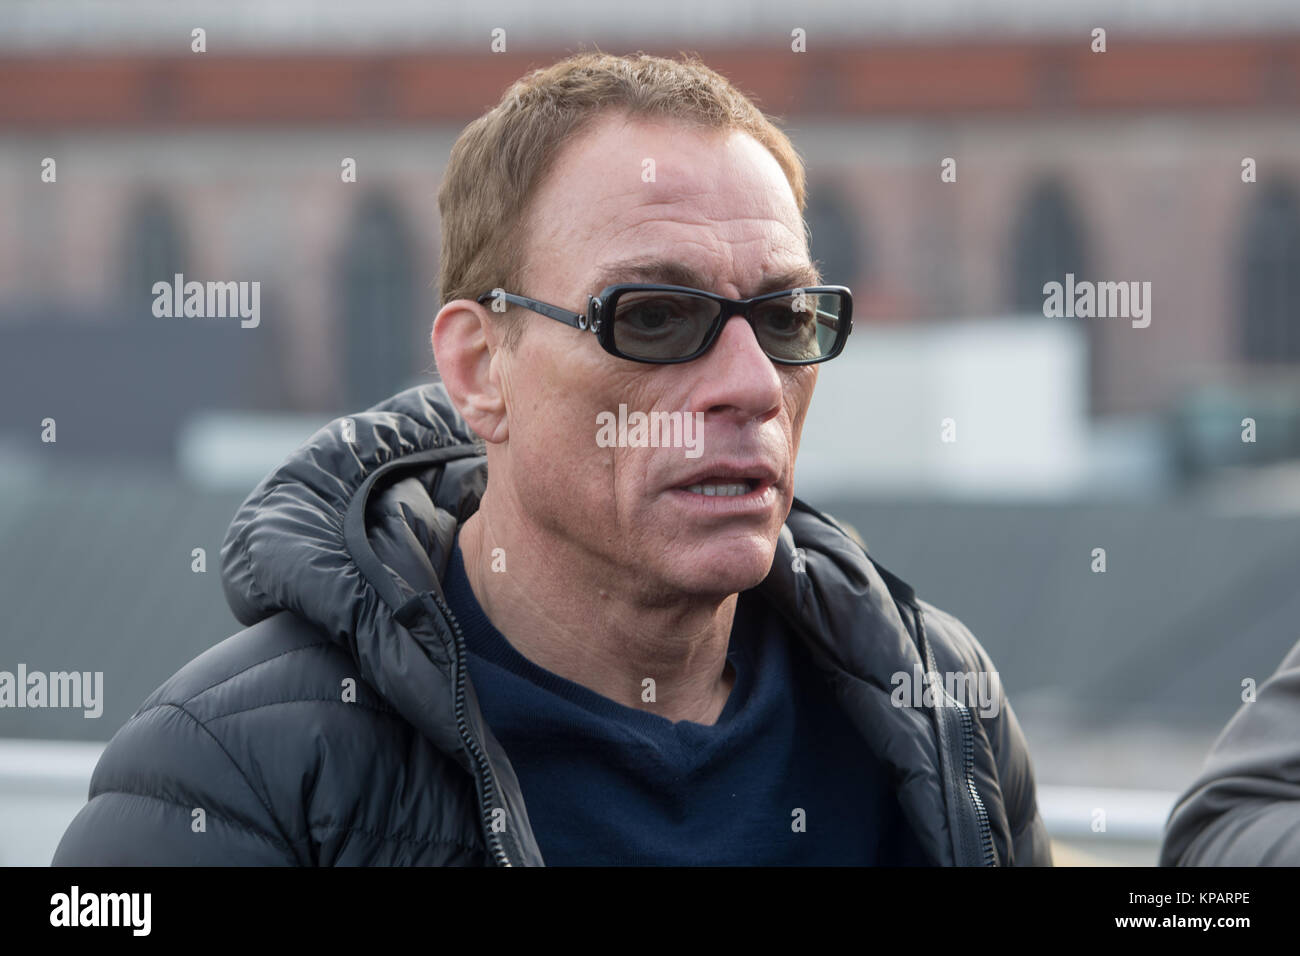 Munich, Germany. 14th December, 2017. Actor Jean-Claude Van Damme wears  sunglasses during a press conference in Munich, 14 December 2017. Van Damme  is going to play the lead character in Amazon's new